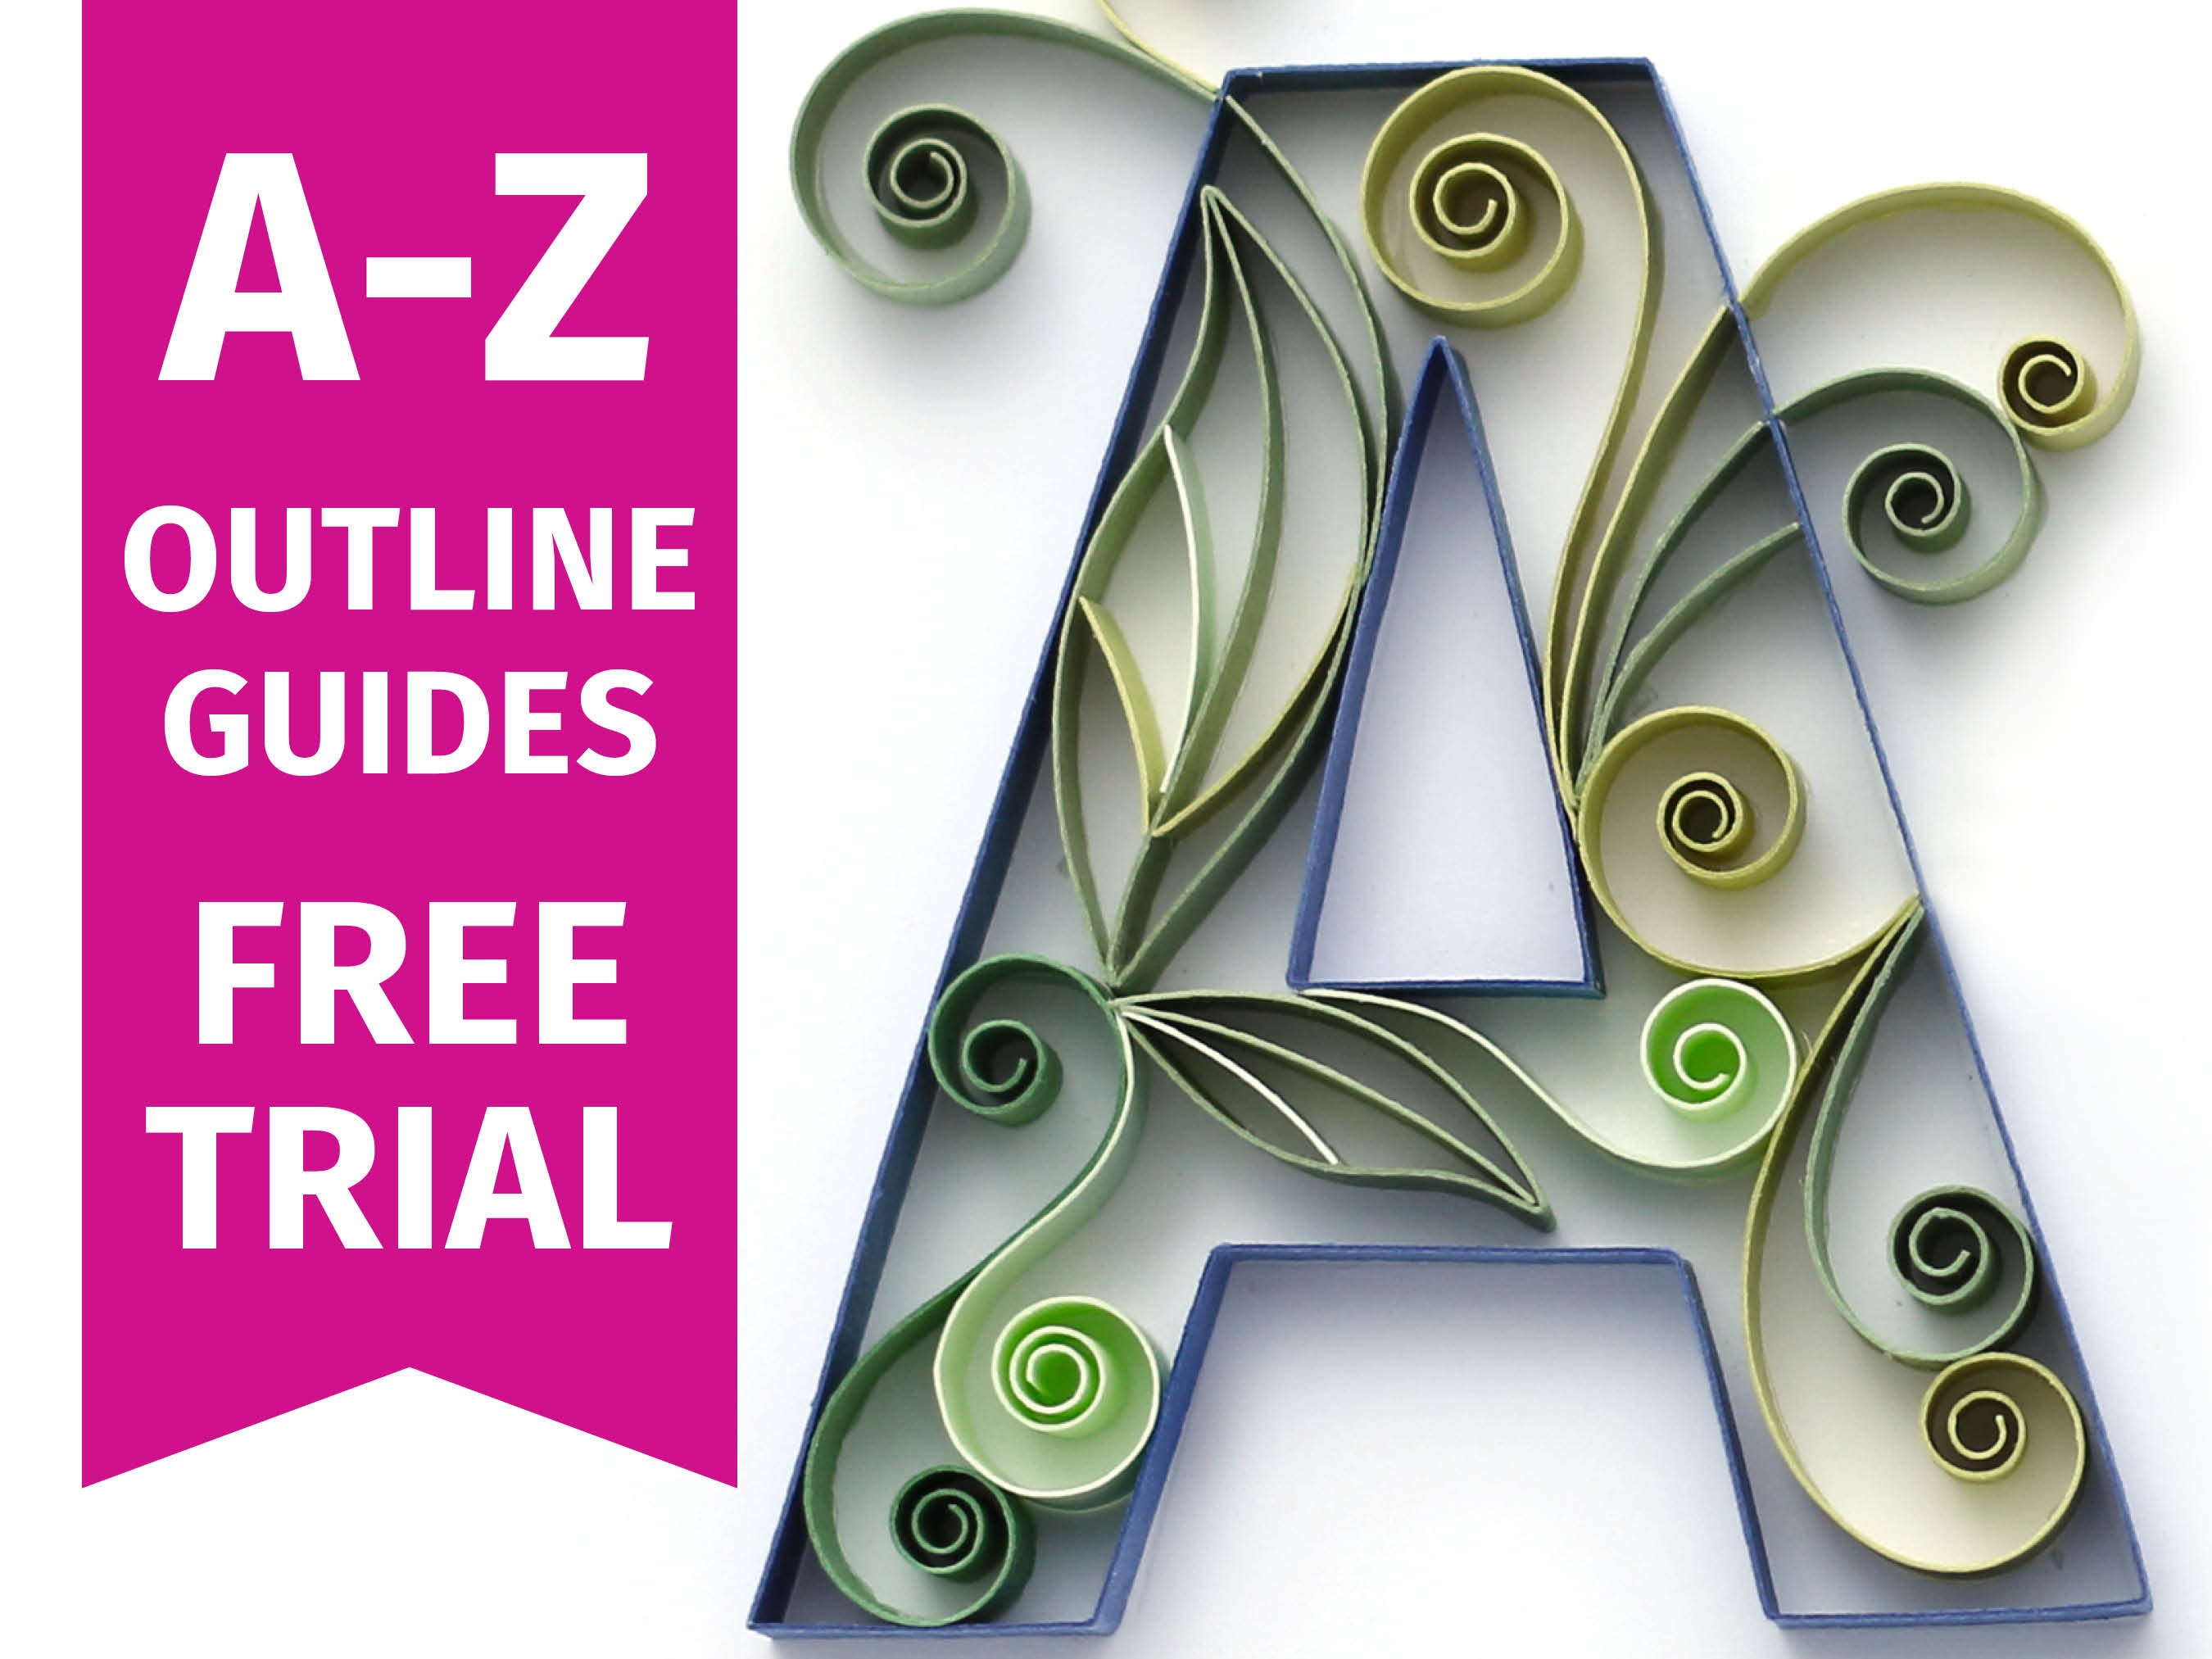 quilling uppercase letters pattern guides to outline a z etsy